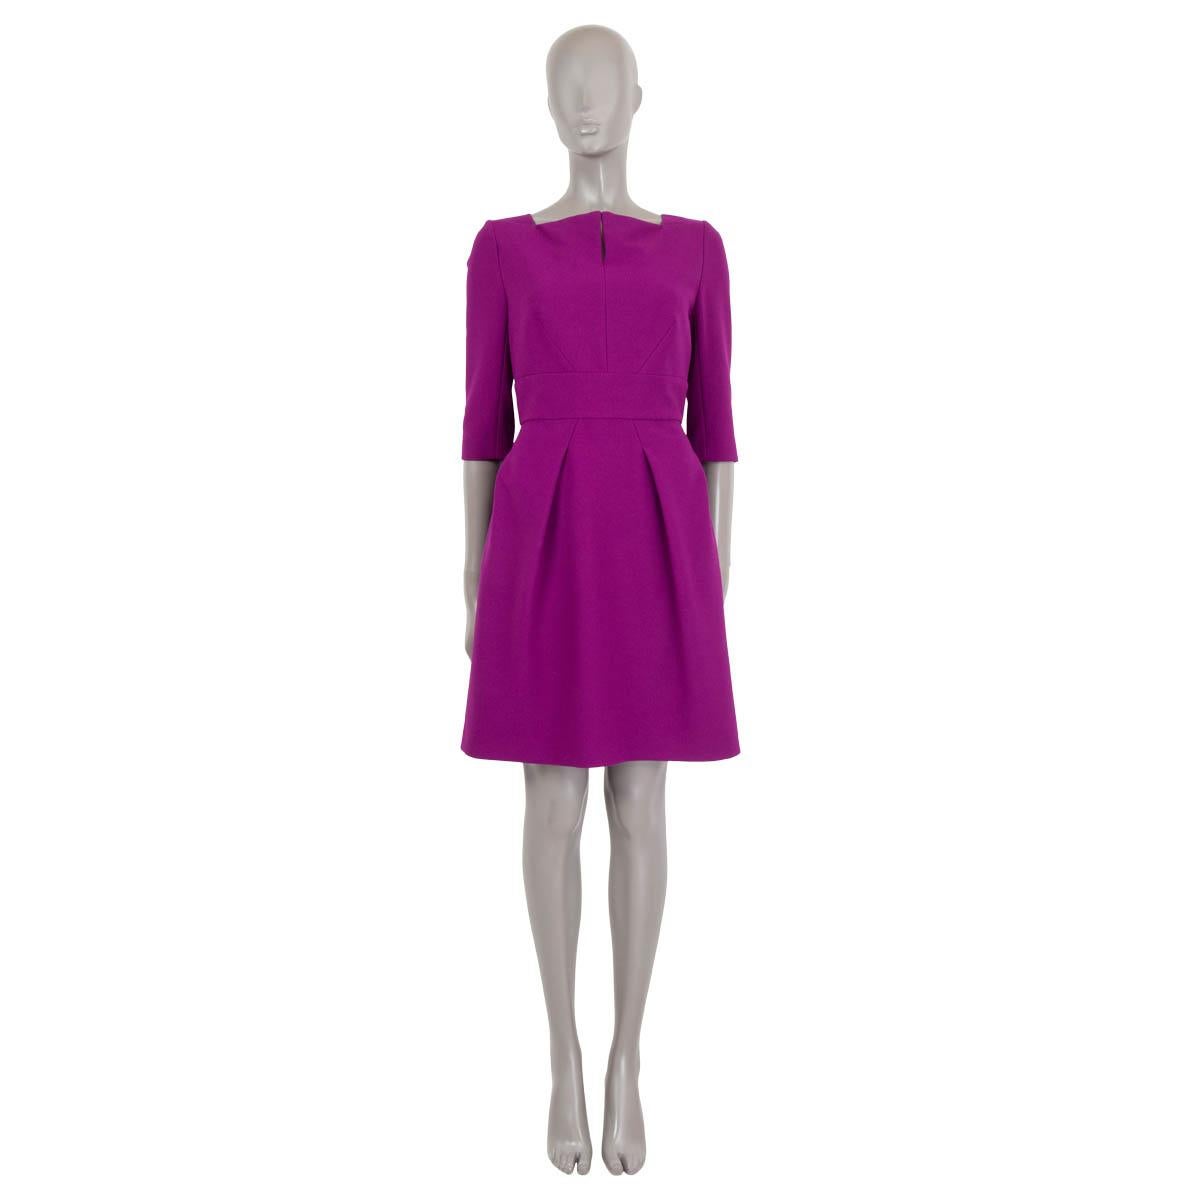 100% authentic Roland Mouret elbow-sleeve dress in purple wool blend (100%) missing tag. Features a split-neck and two pockets on the sides. Opens with a gold tone zipper on the back. Unlined. Has been worn and is in excellent